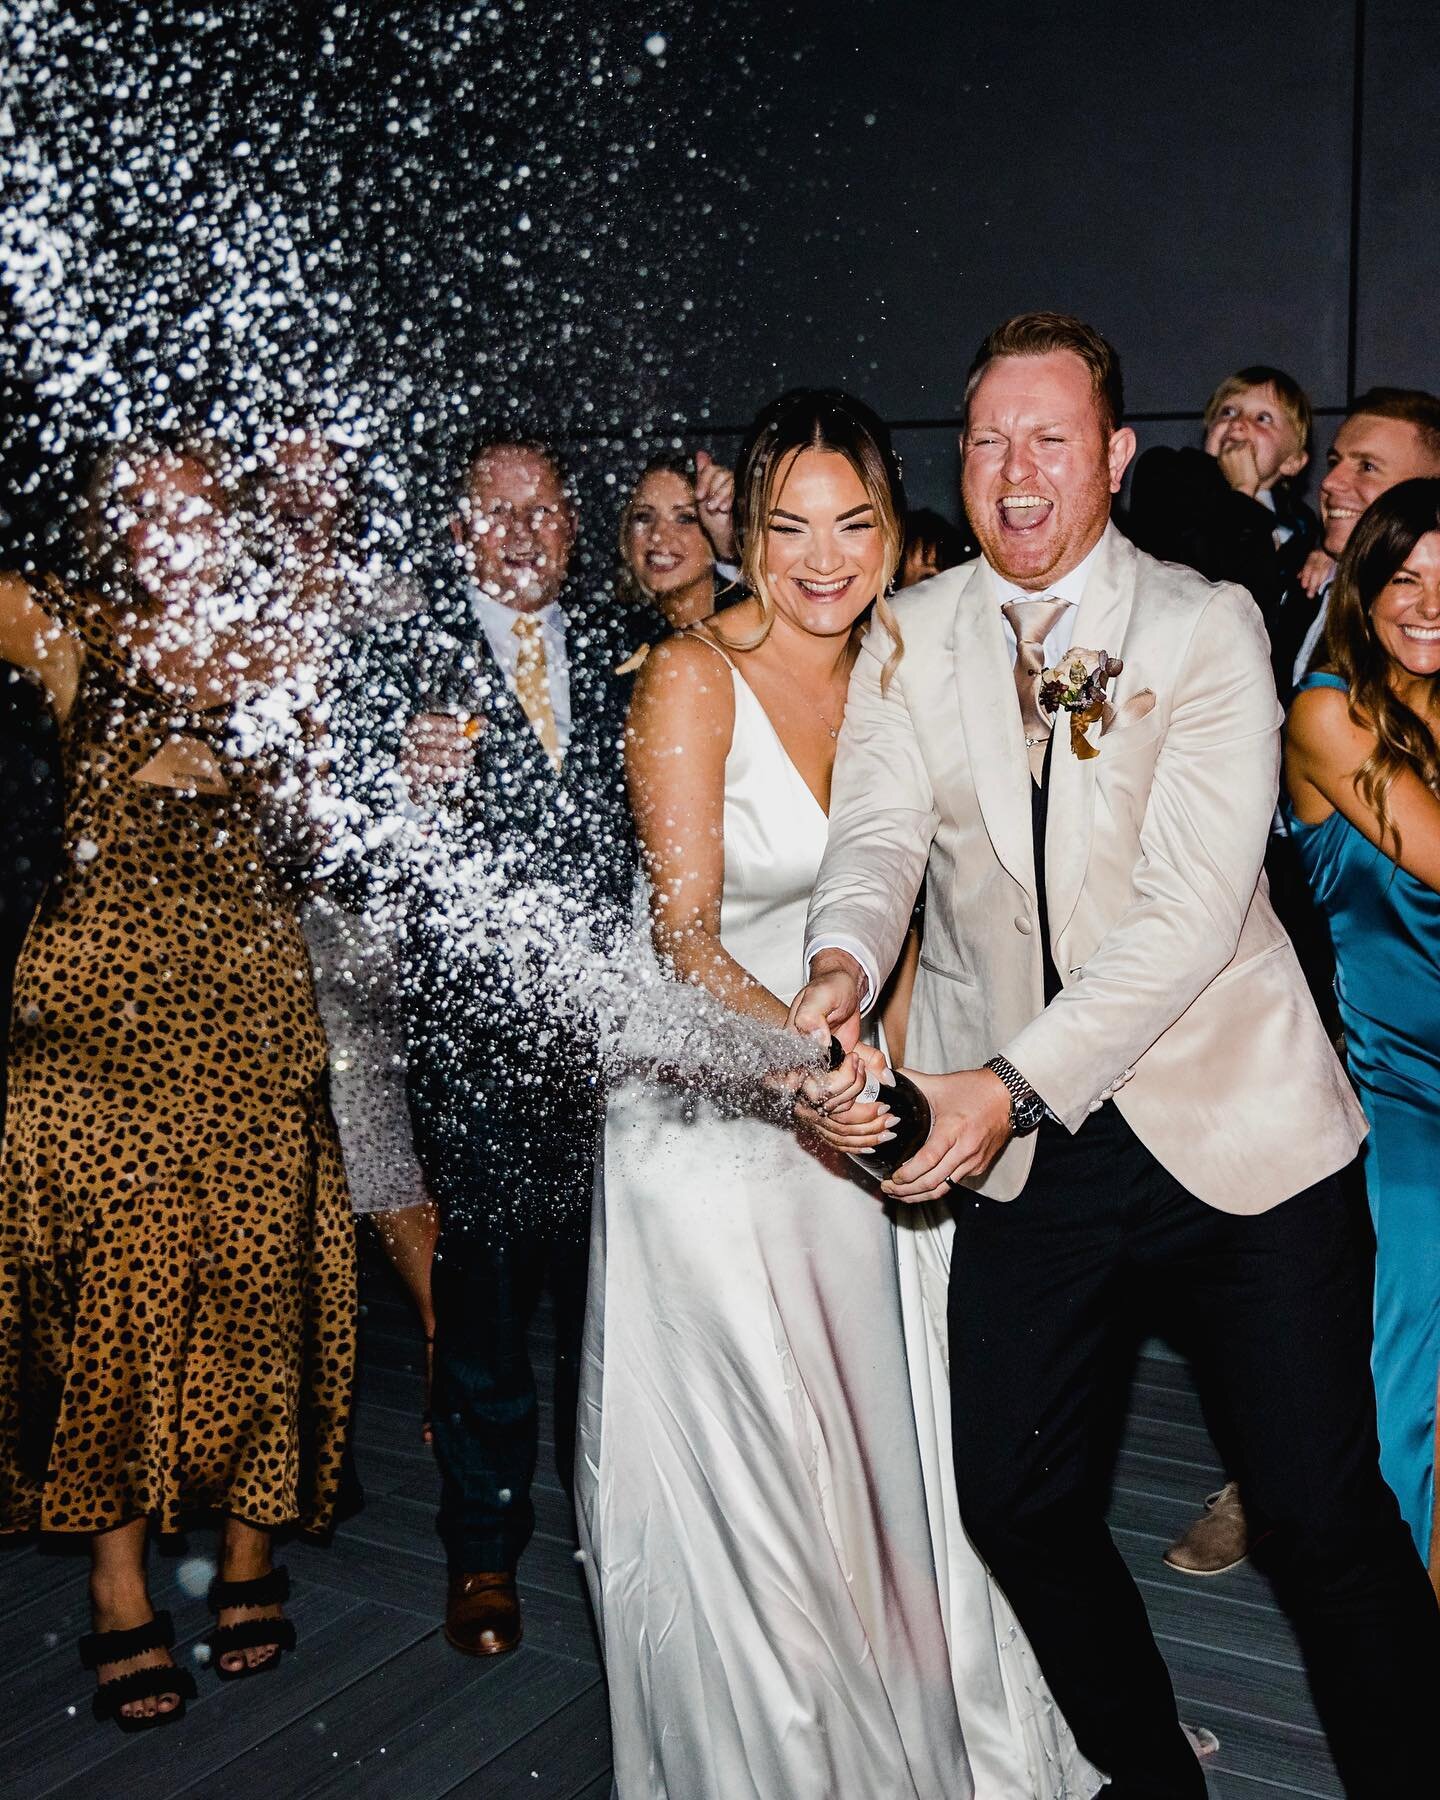 Throwback to Mr. and Mrs. Pettit's wedding last year at Pipe and Glass, followed by the party at the Lexington! 

Here&rsquo;s just a few snaps from their fun fuelled wedding!

Safe to say, I was scared for my camera's life during this first shot, bu